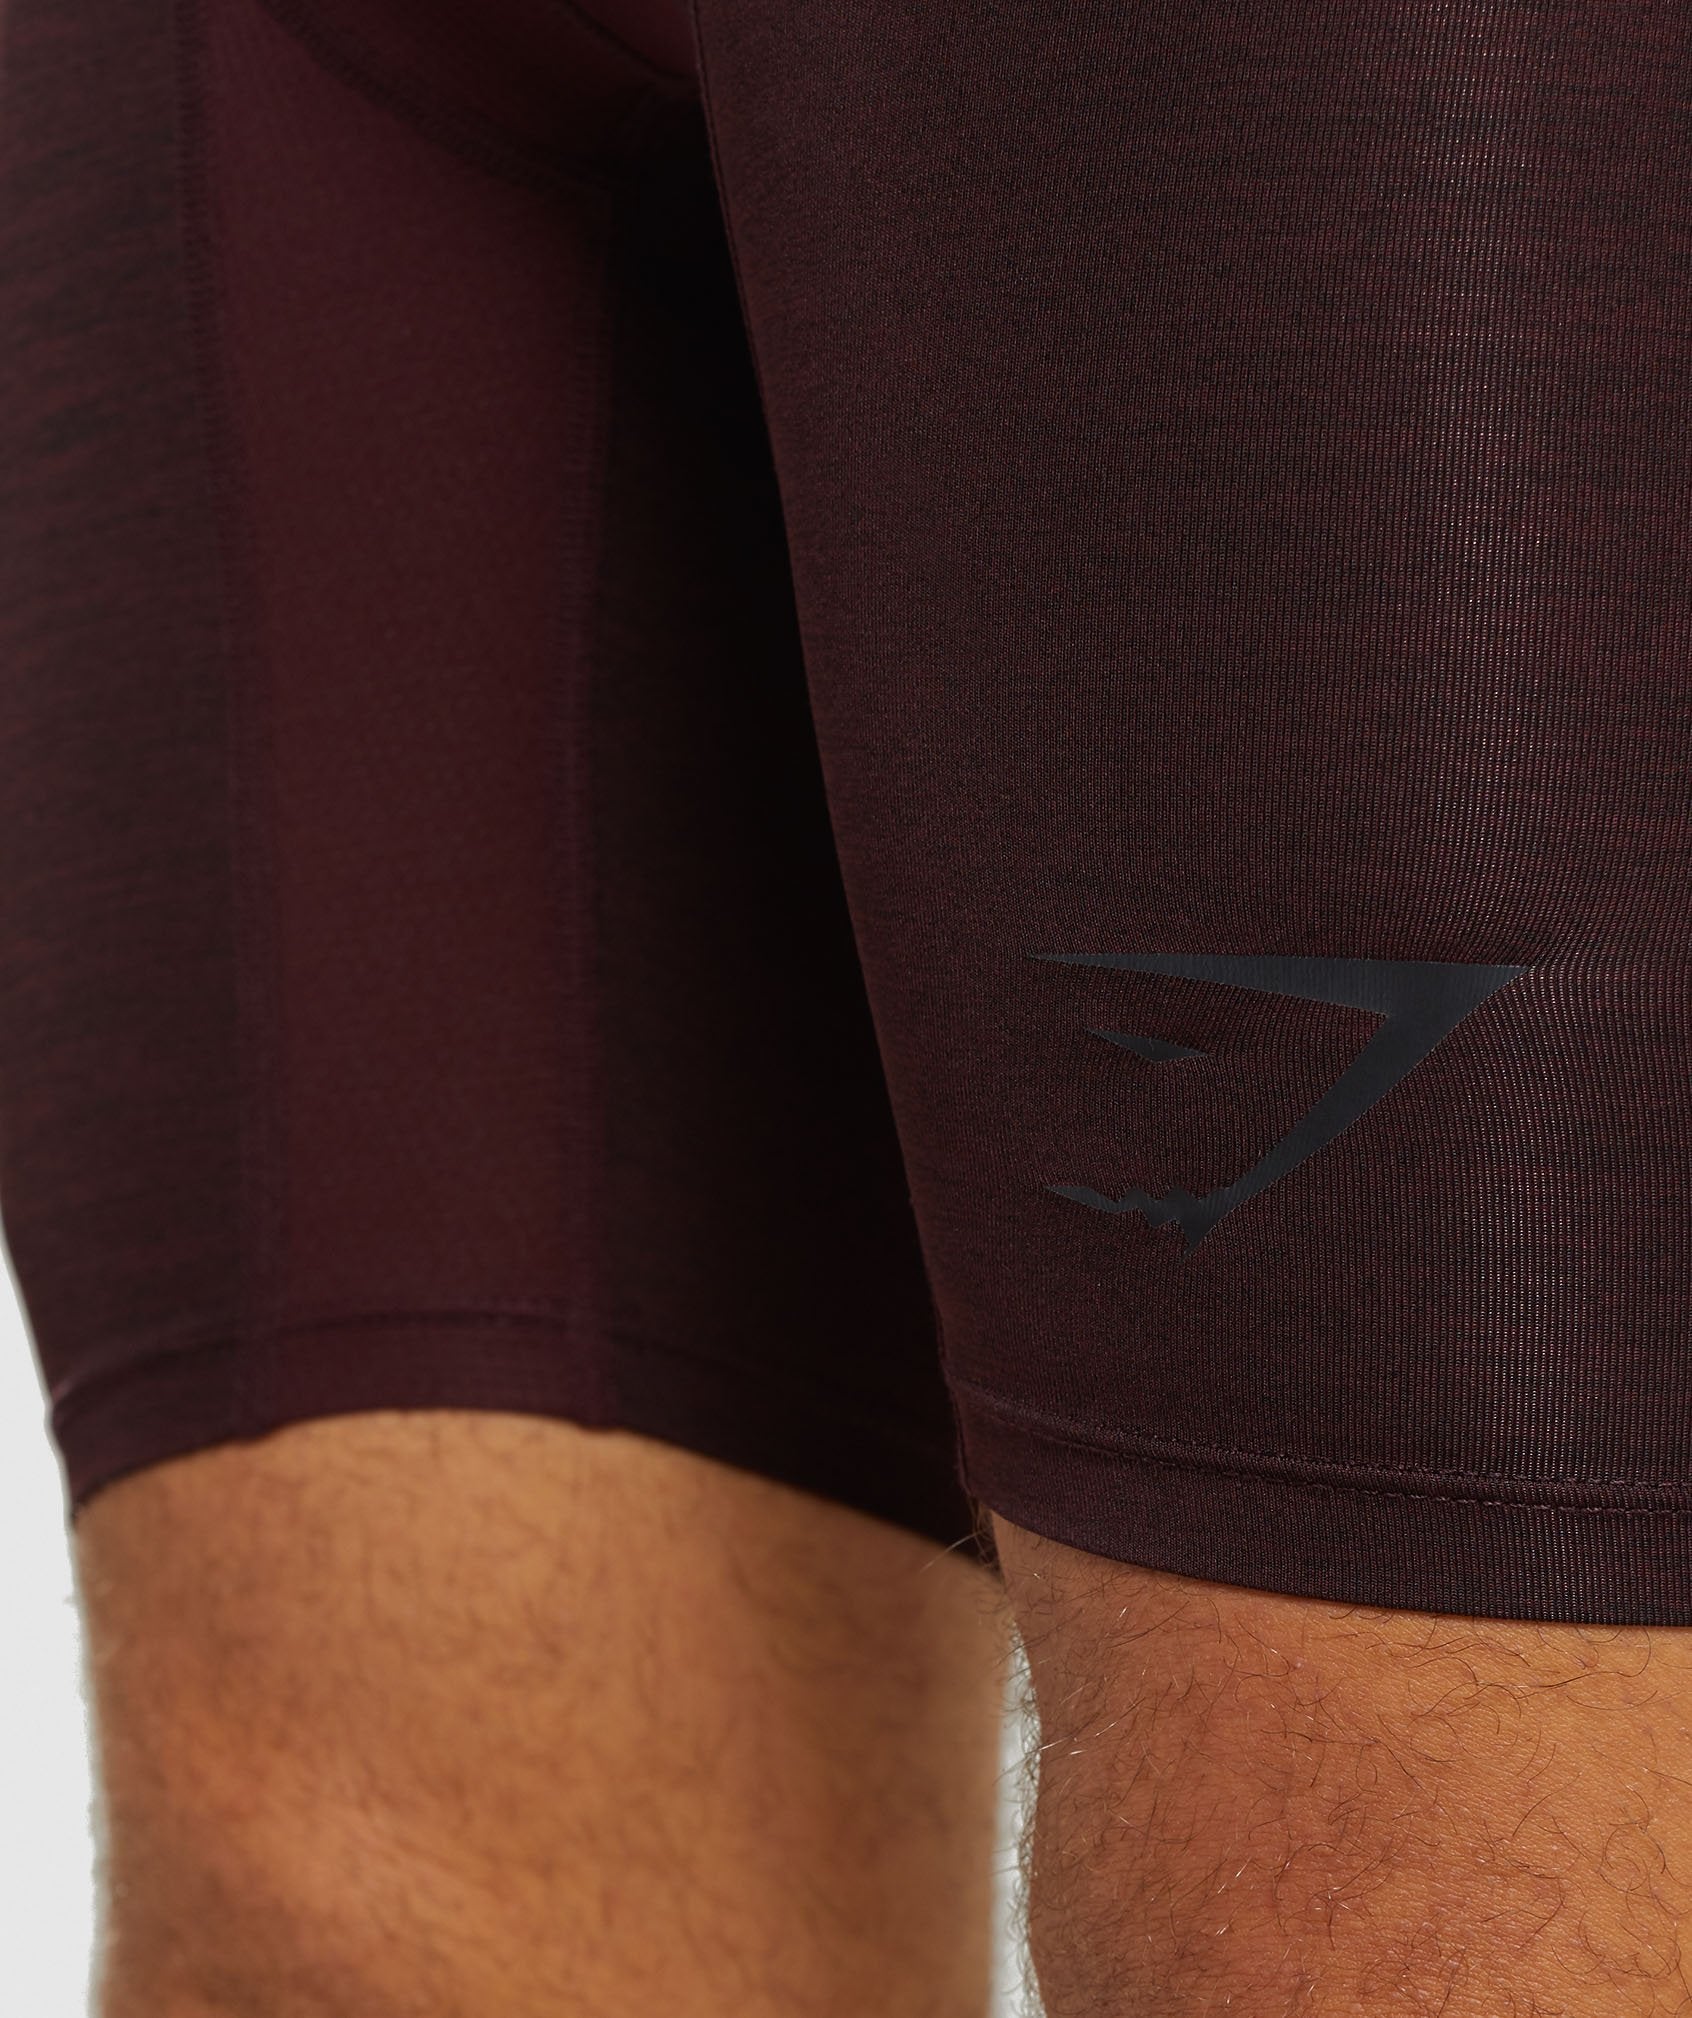 Element+ Baselayer Shorts in Ox Red Marl - view 5